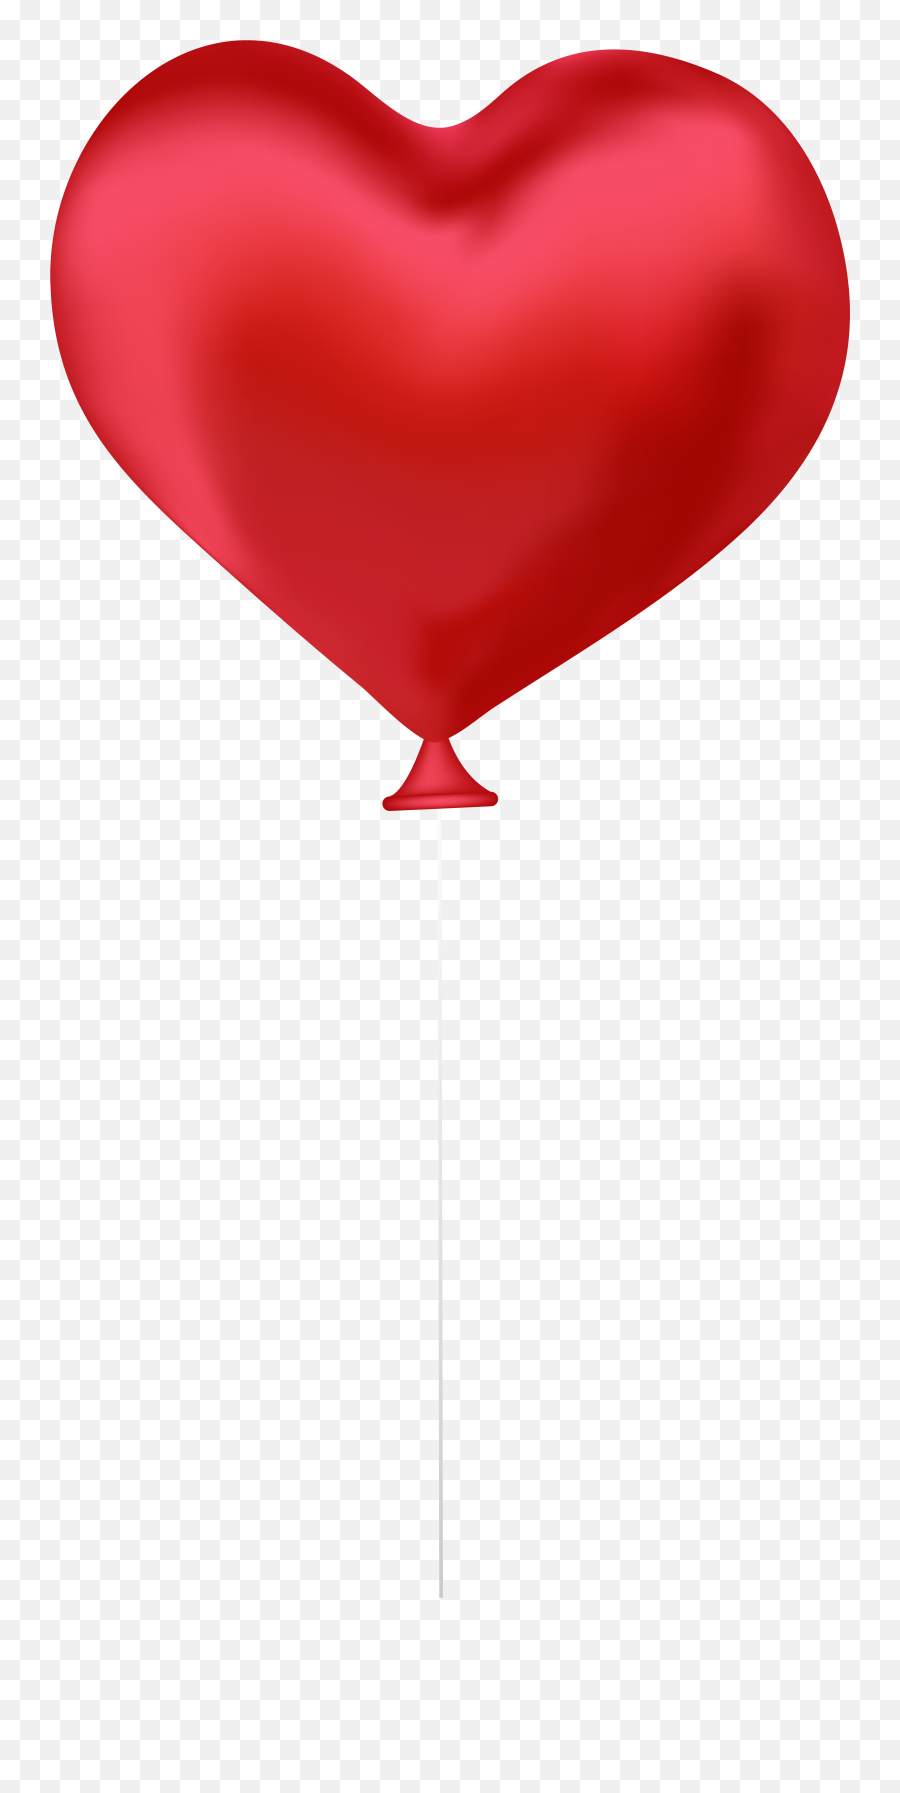 Red Heart Balloon Png Clipart - Transparent Red Heart Balloon Png Emoji,Heart Emoji Balloons